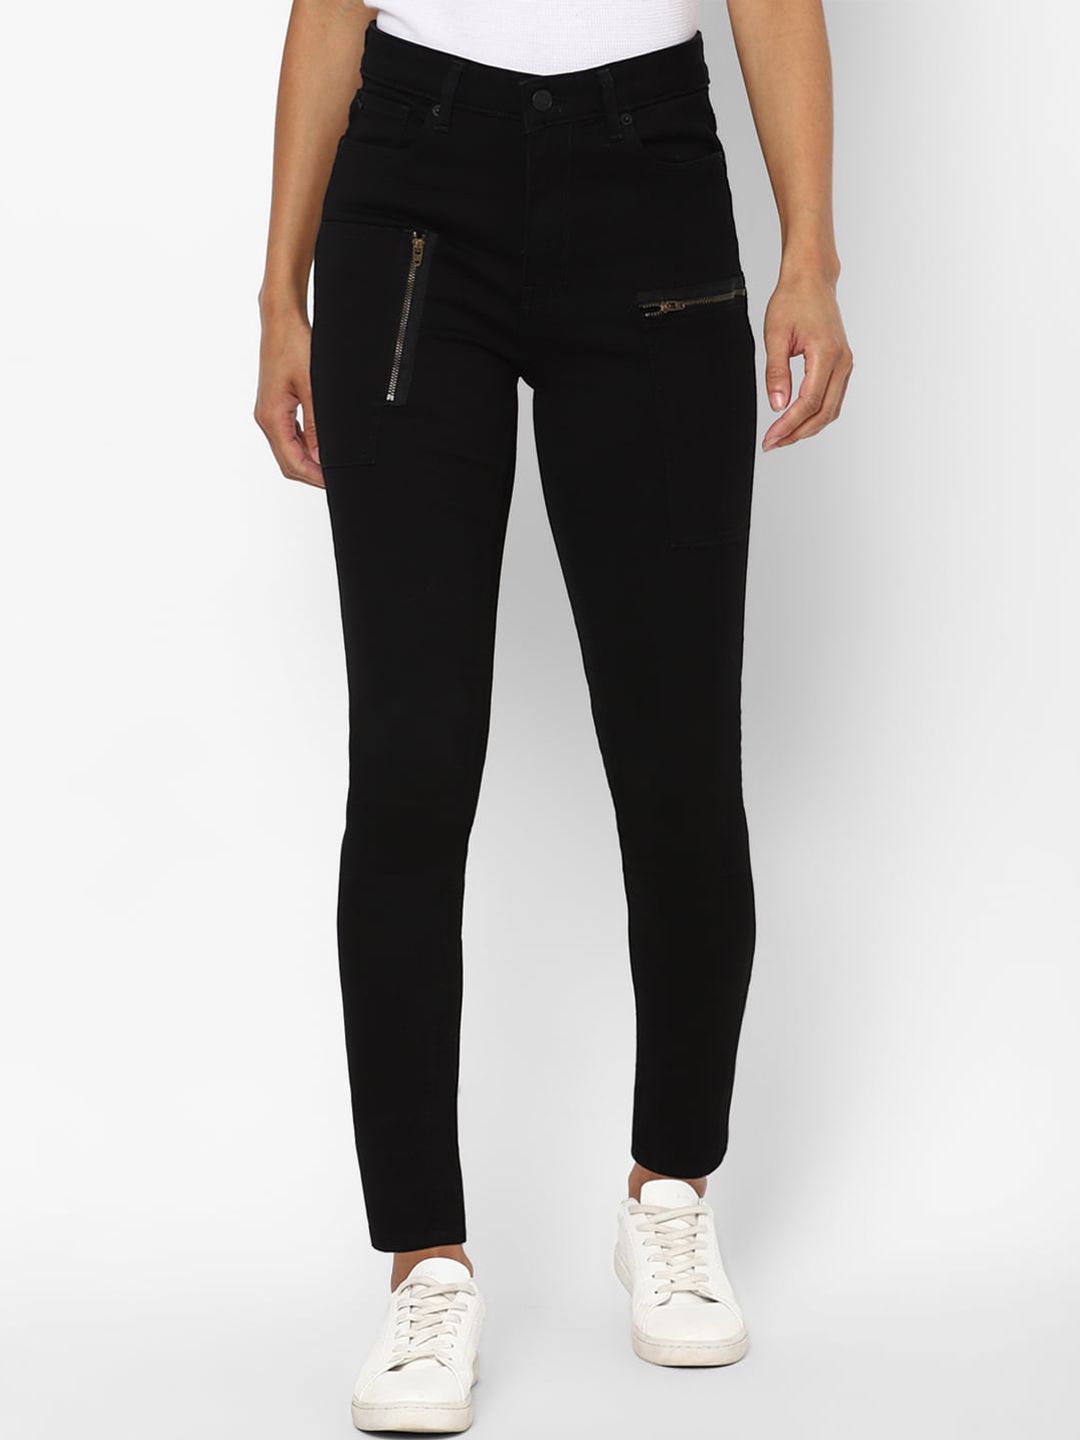 Allen Solly Woman Women Black Skinny Fit Jeans Price in India